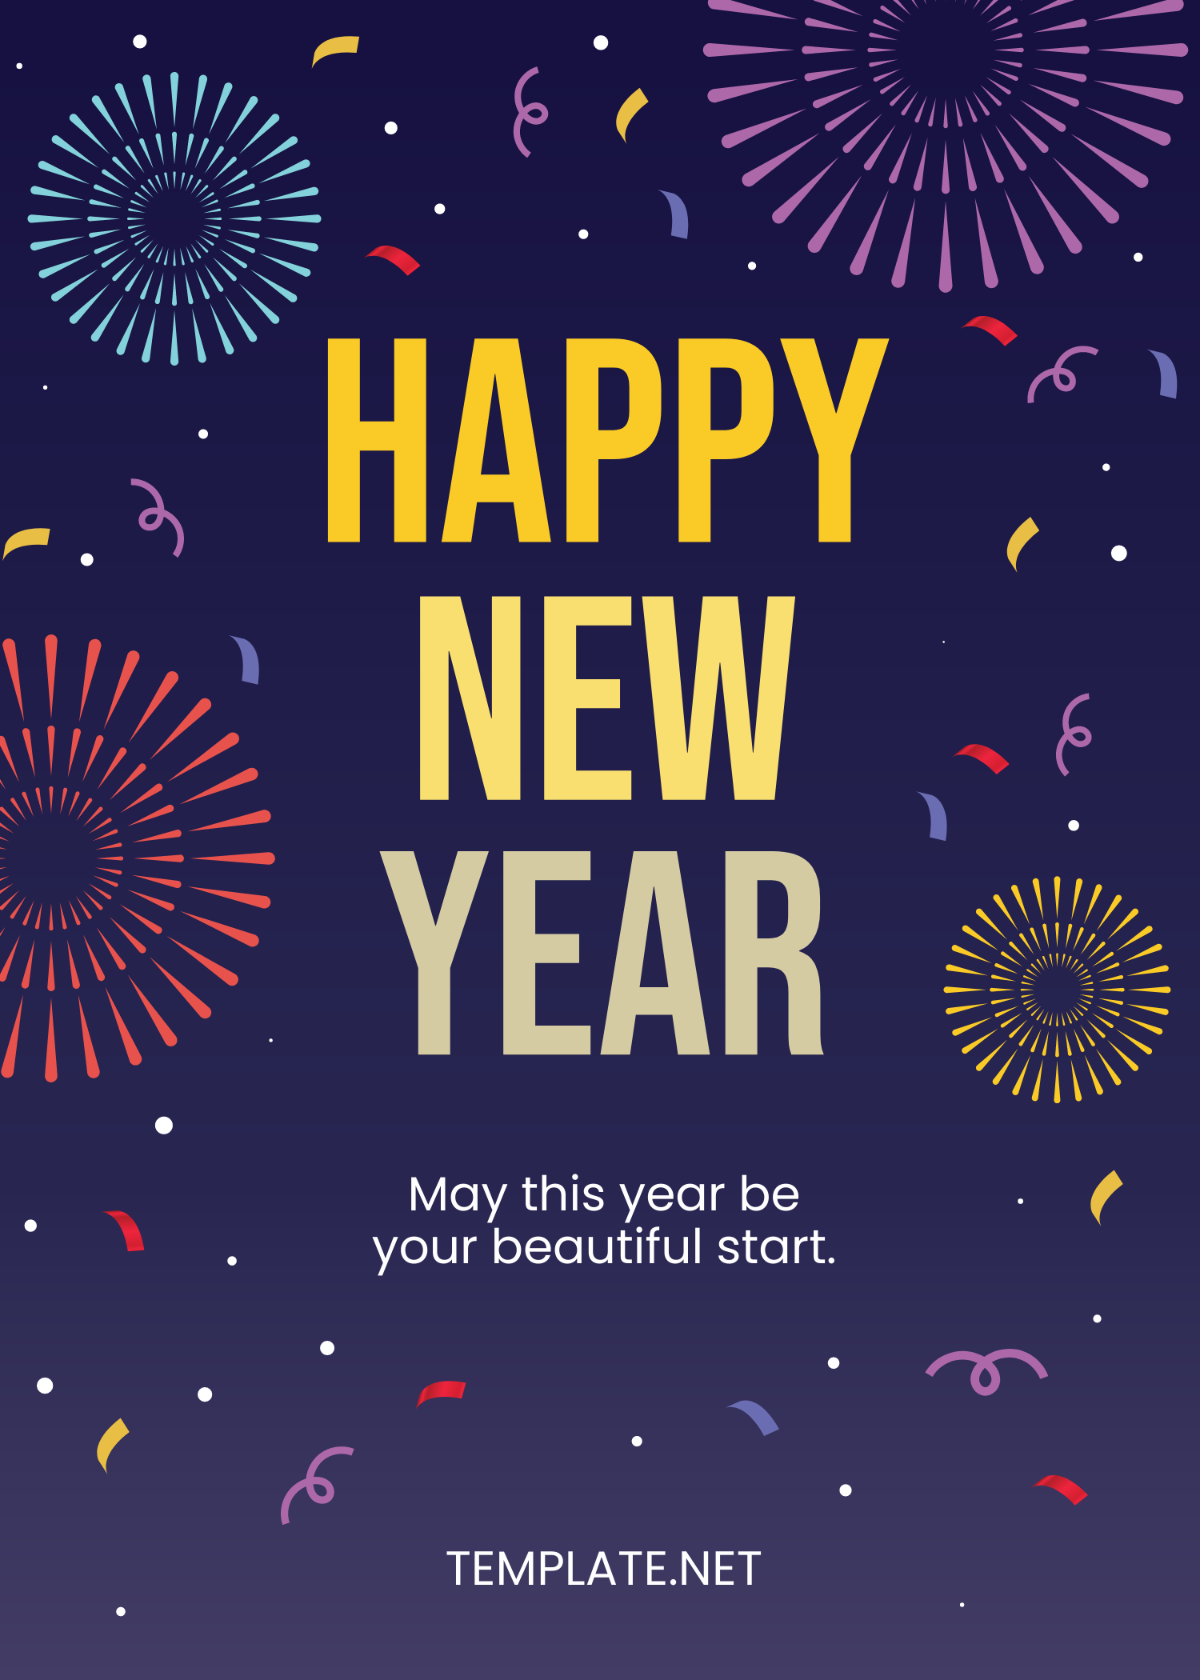 Unique New Year Wishes